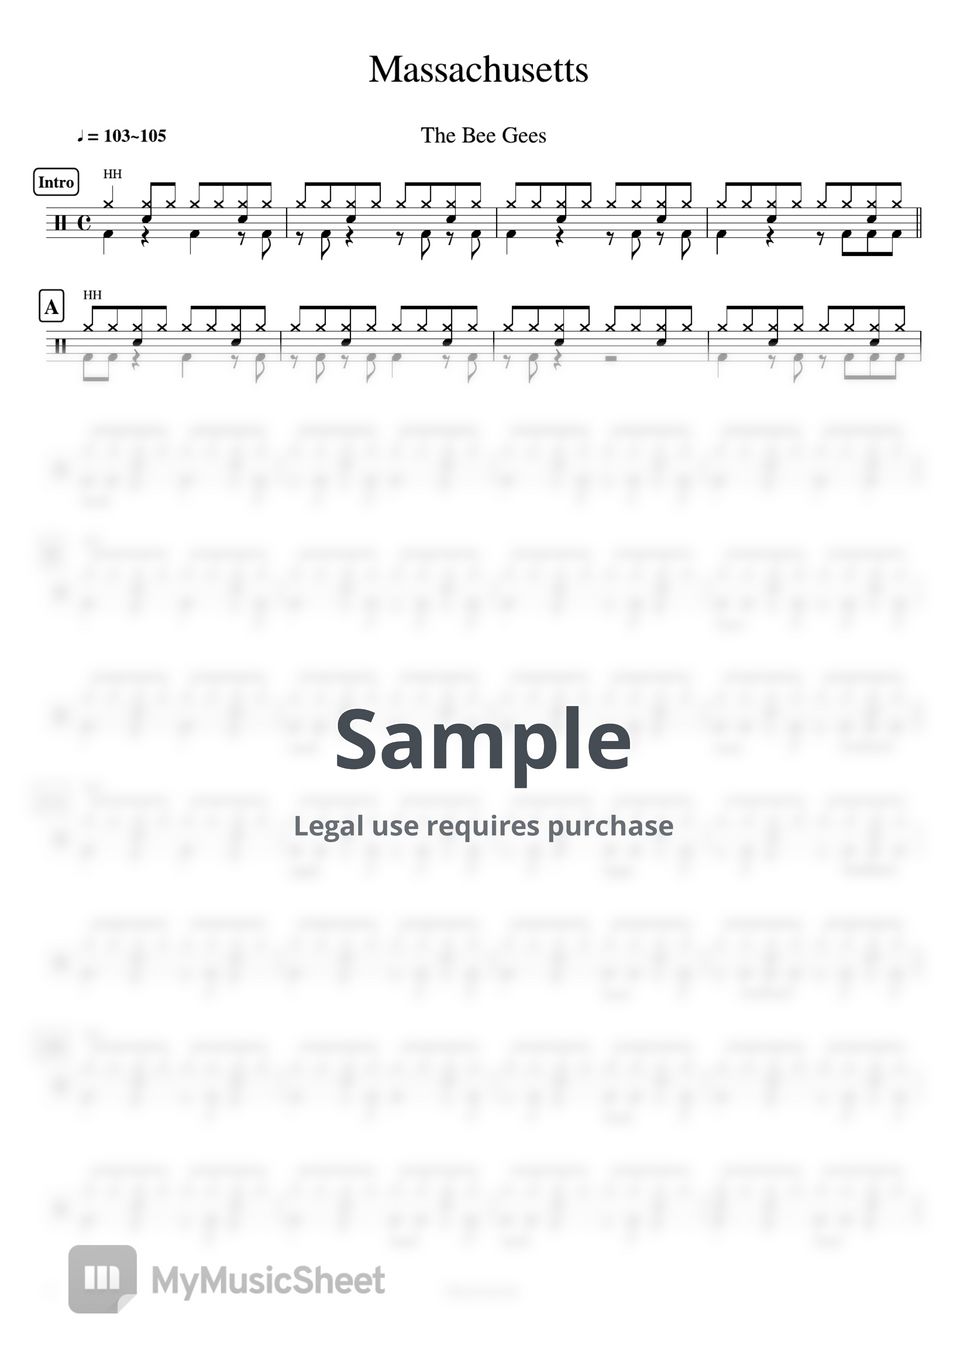 The Bee Gees - Massachusetts by Cookai's J-pop Drum sheet music!!!